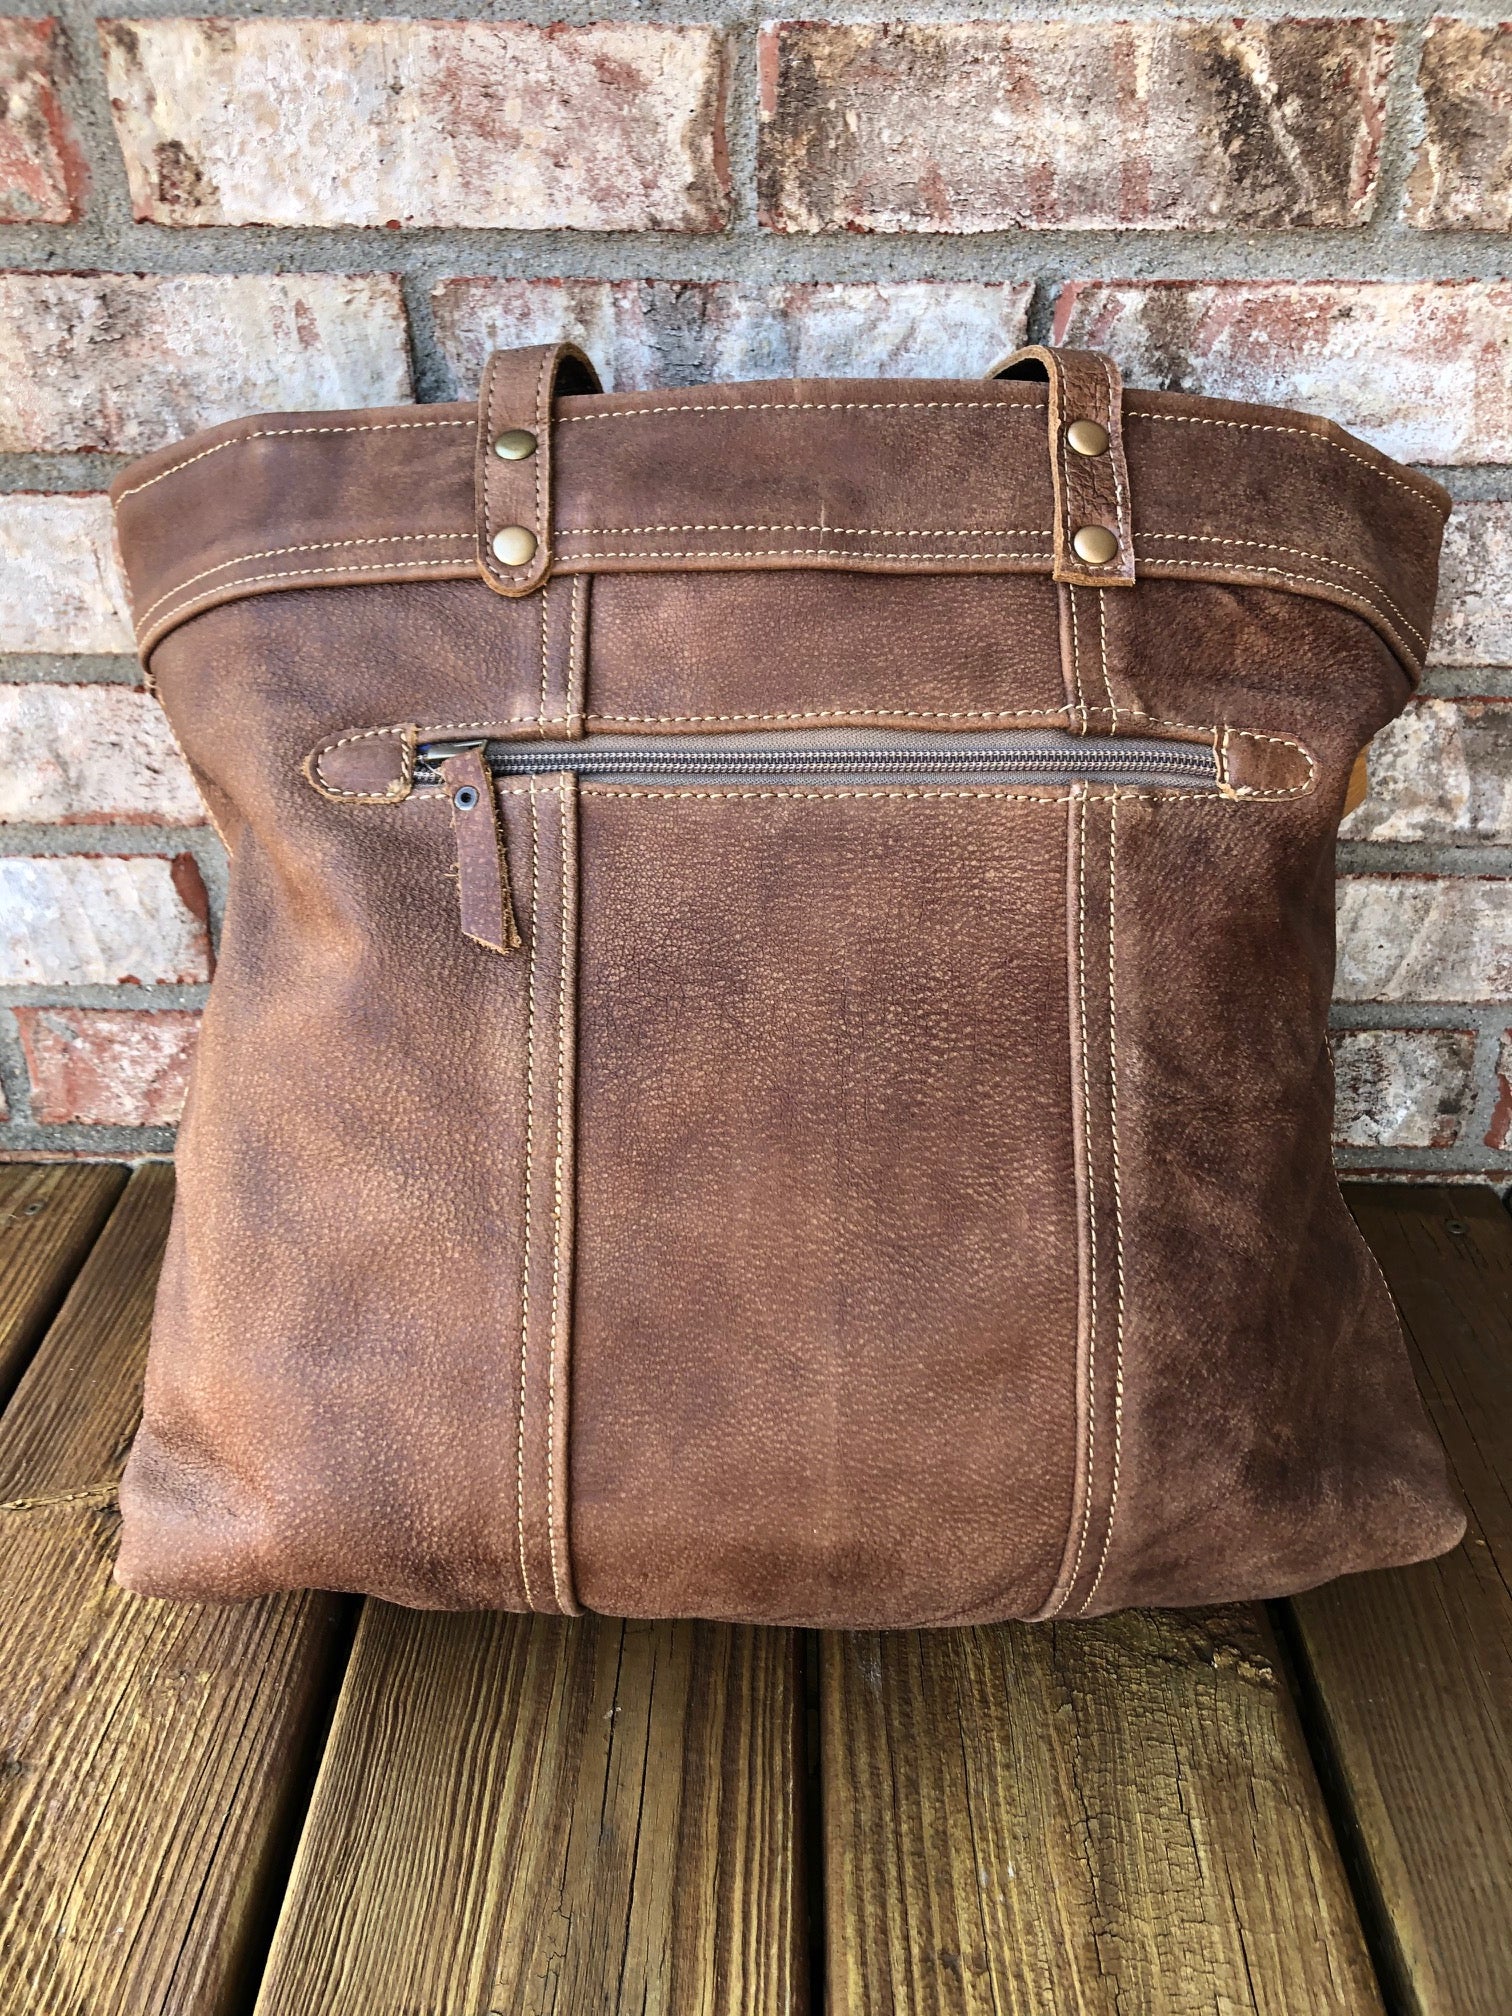 Banana Republic Extra Large Buttery Soft Brown Leather Duffel Tote Shopper  Overnight Purse Book Wide Strap Shoulder Bag Travel Southwestern - Etsy